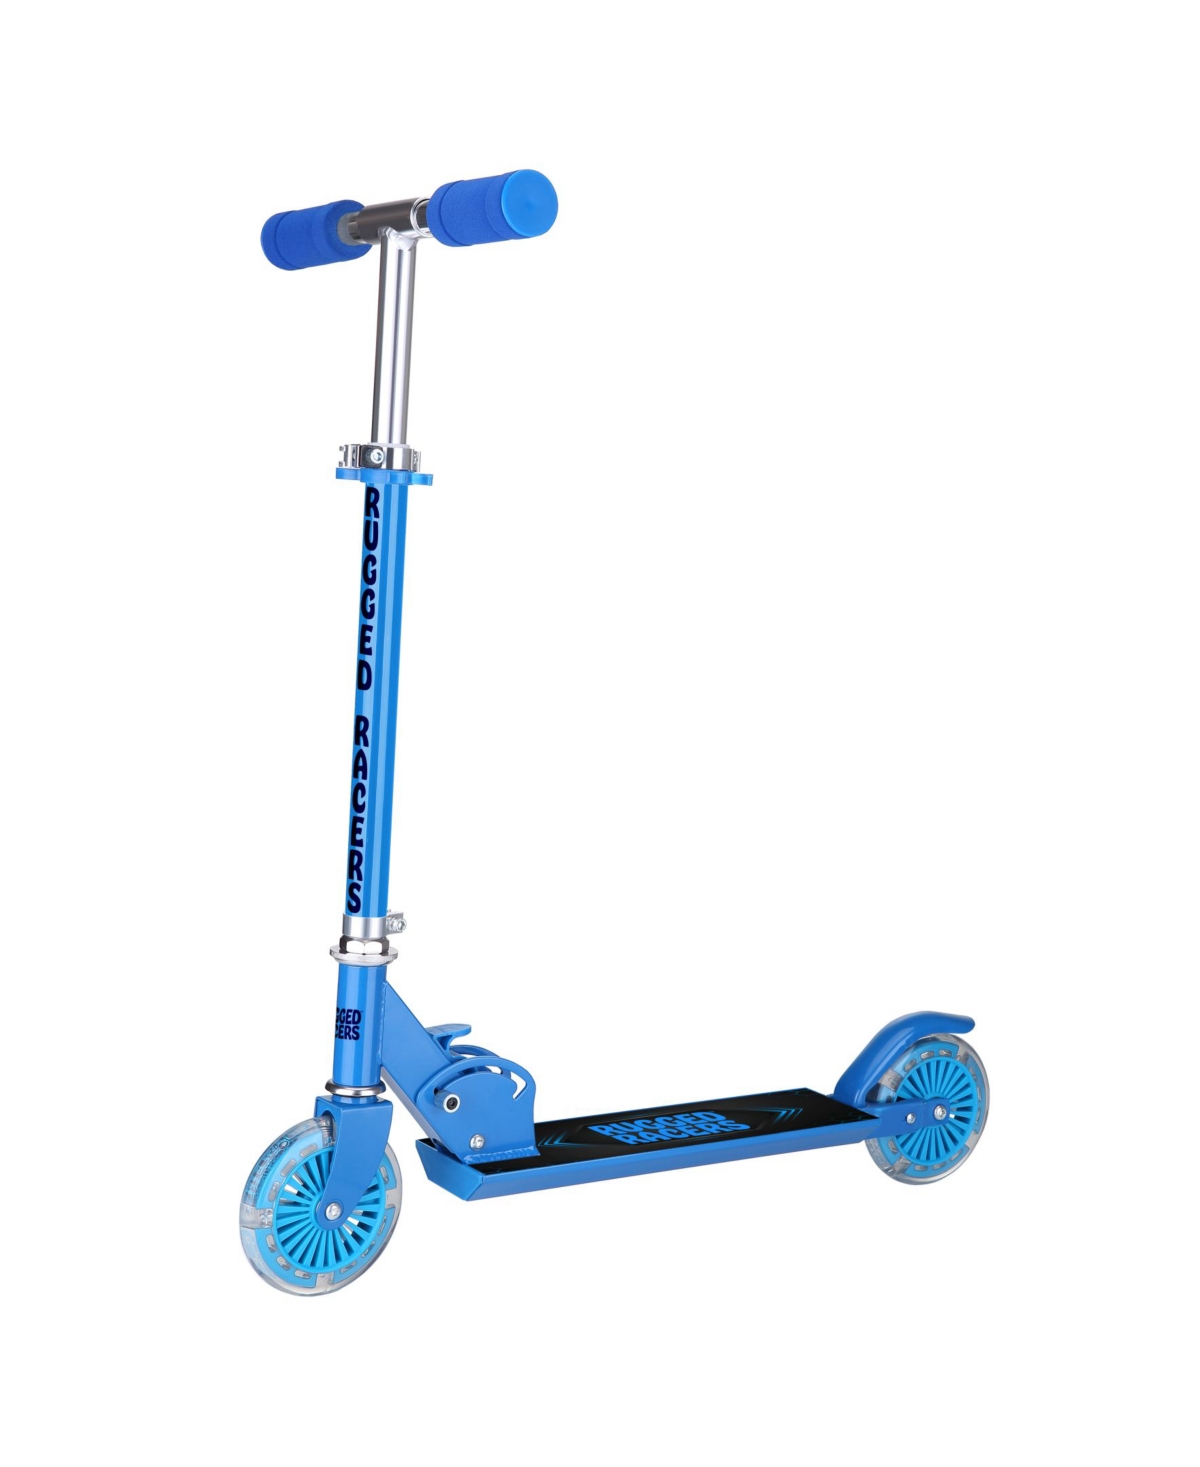 Rugged Racers 2-wheel Foldable Kids Scooter In Blue